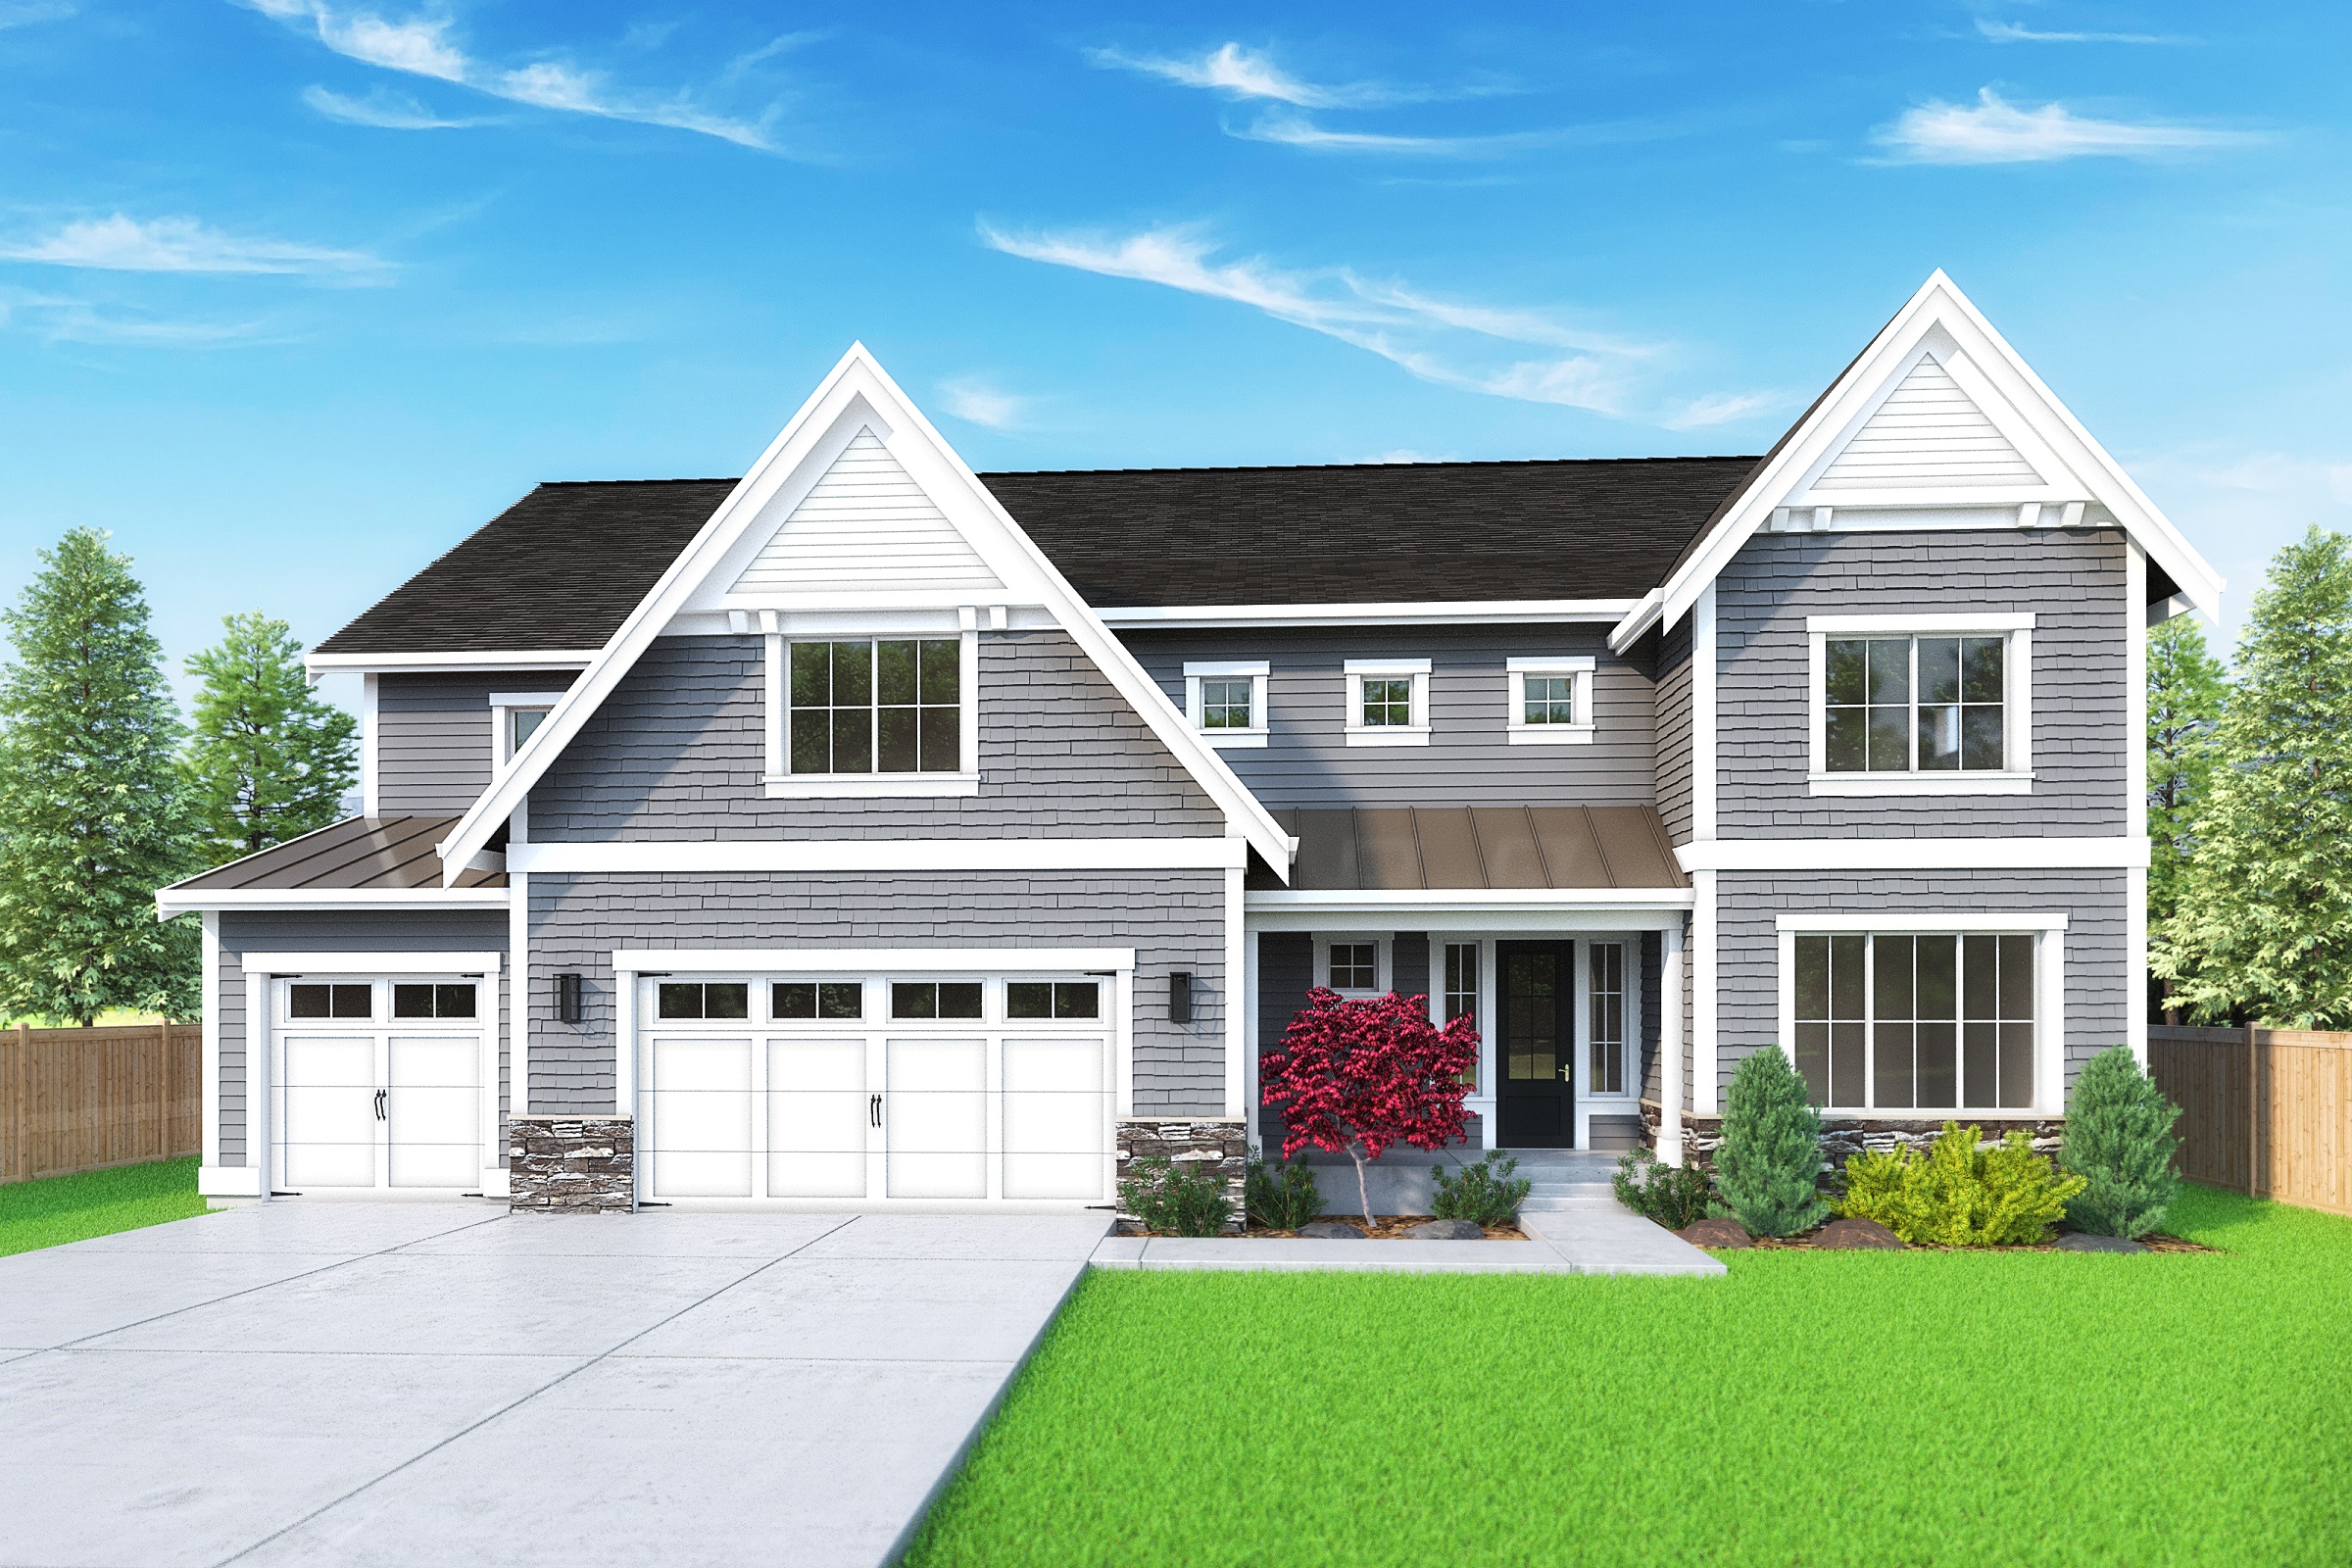 View our new luxury home construction on 2821 109th Ave SE, in Bellevue, WA from MN Custom Homes